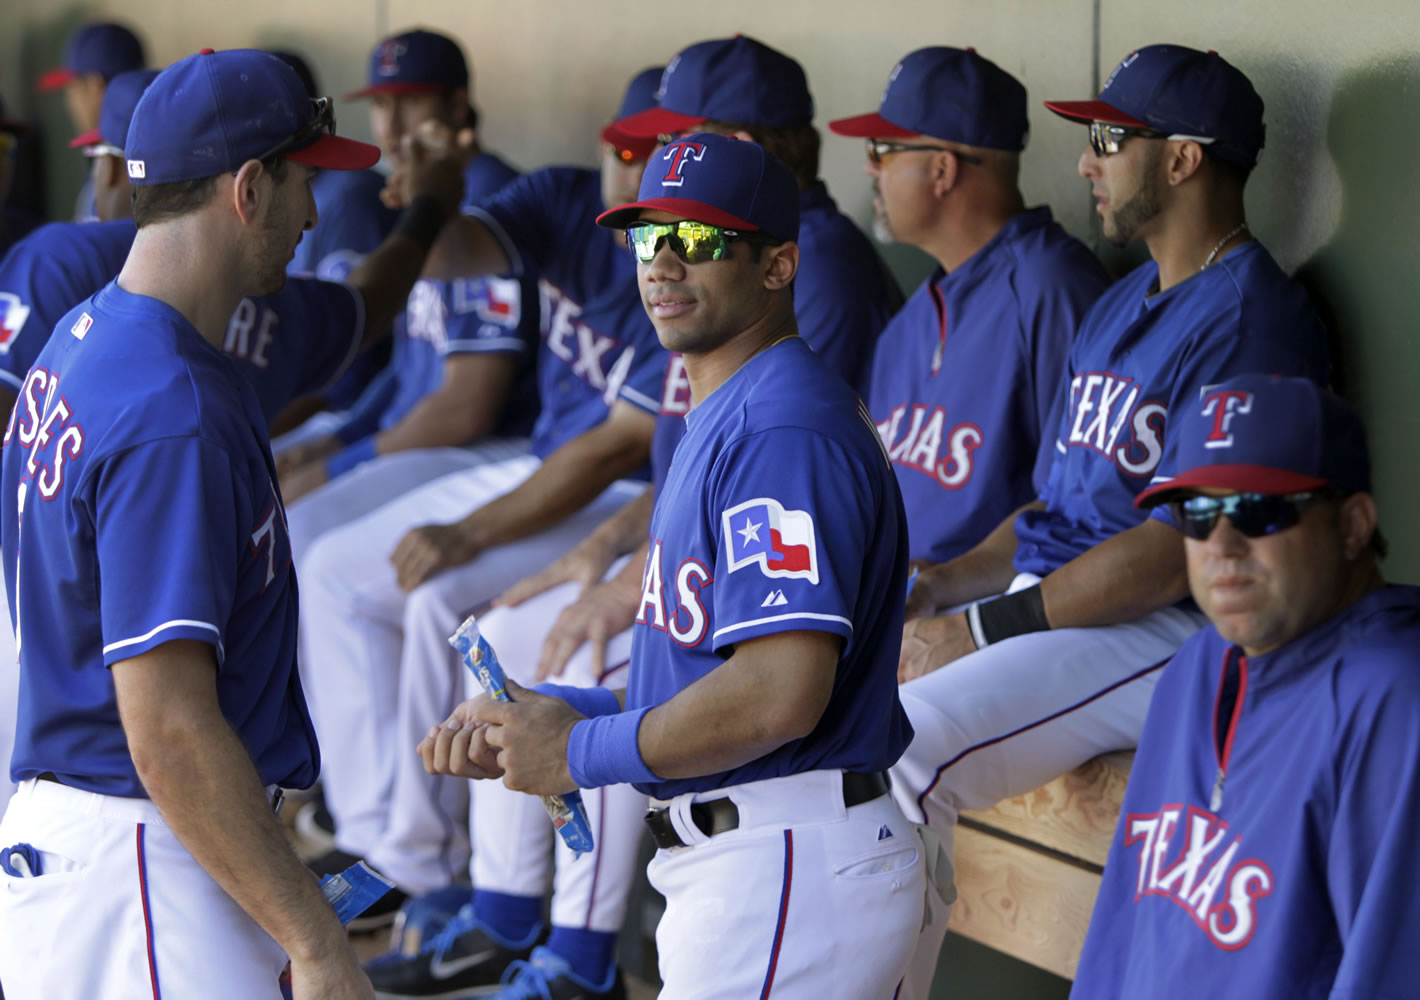 Seattle Seahawks quarterback Russell Wilson, center, talks with Texas Rangers' Adam Rosales, left, as he stands in the dugout during a spring training game against the Cleveland Indians on Monday in Surprise , Ariz.